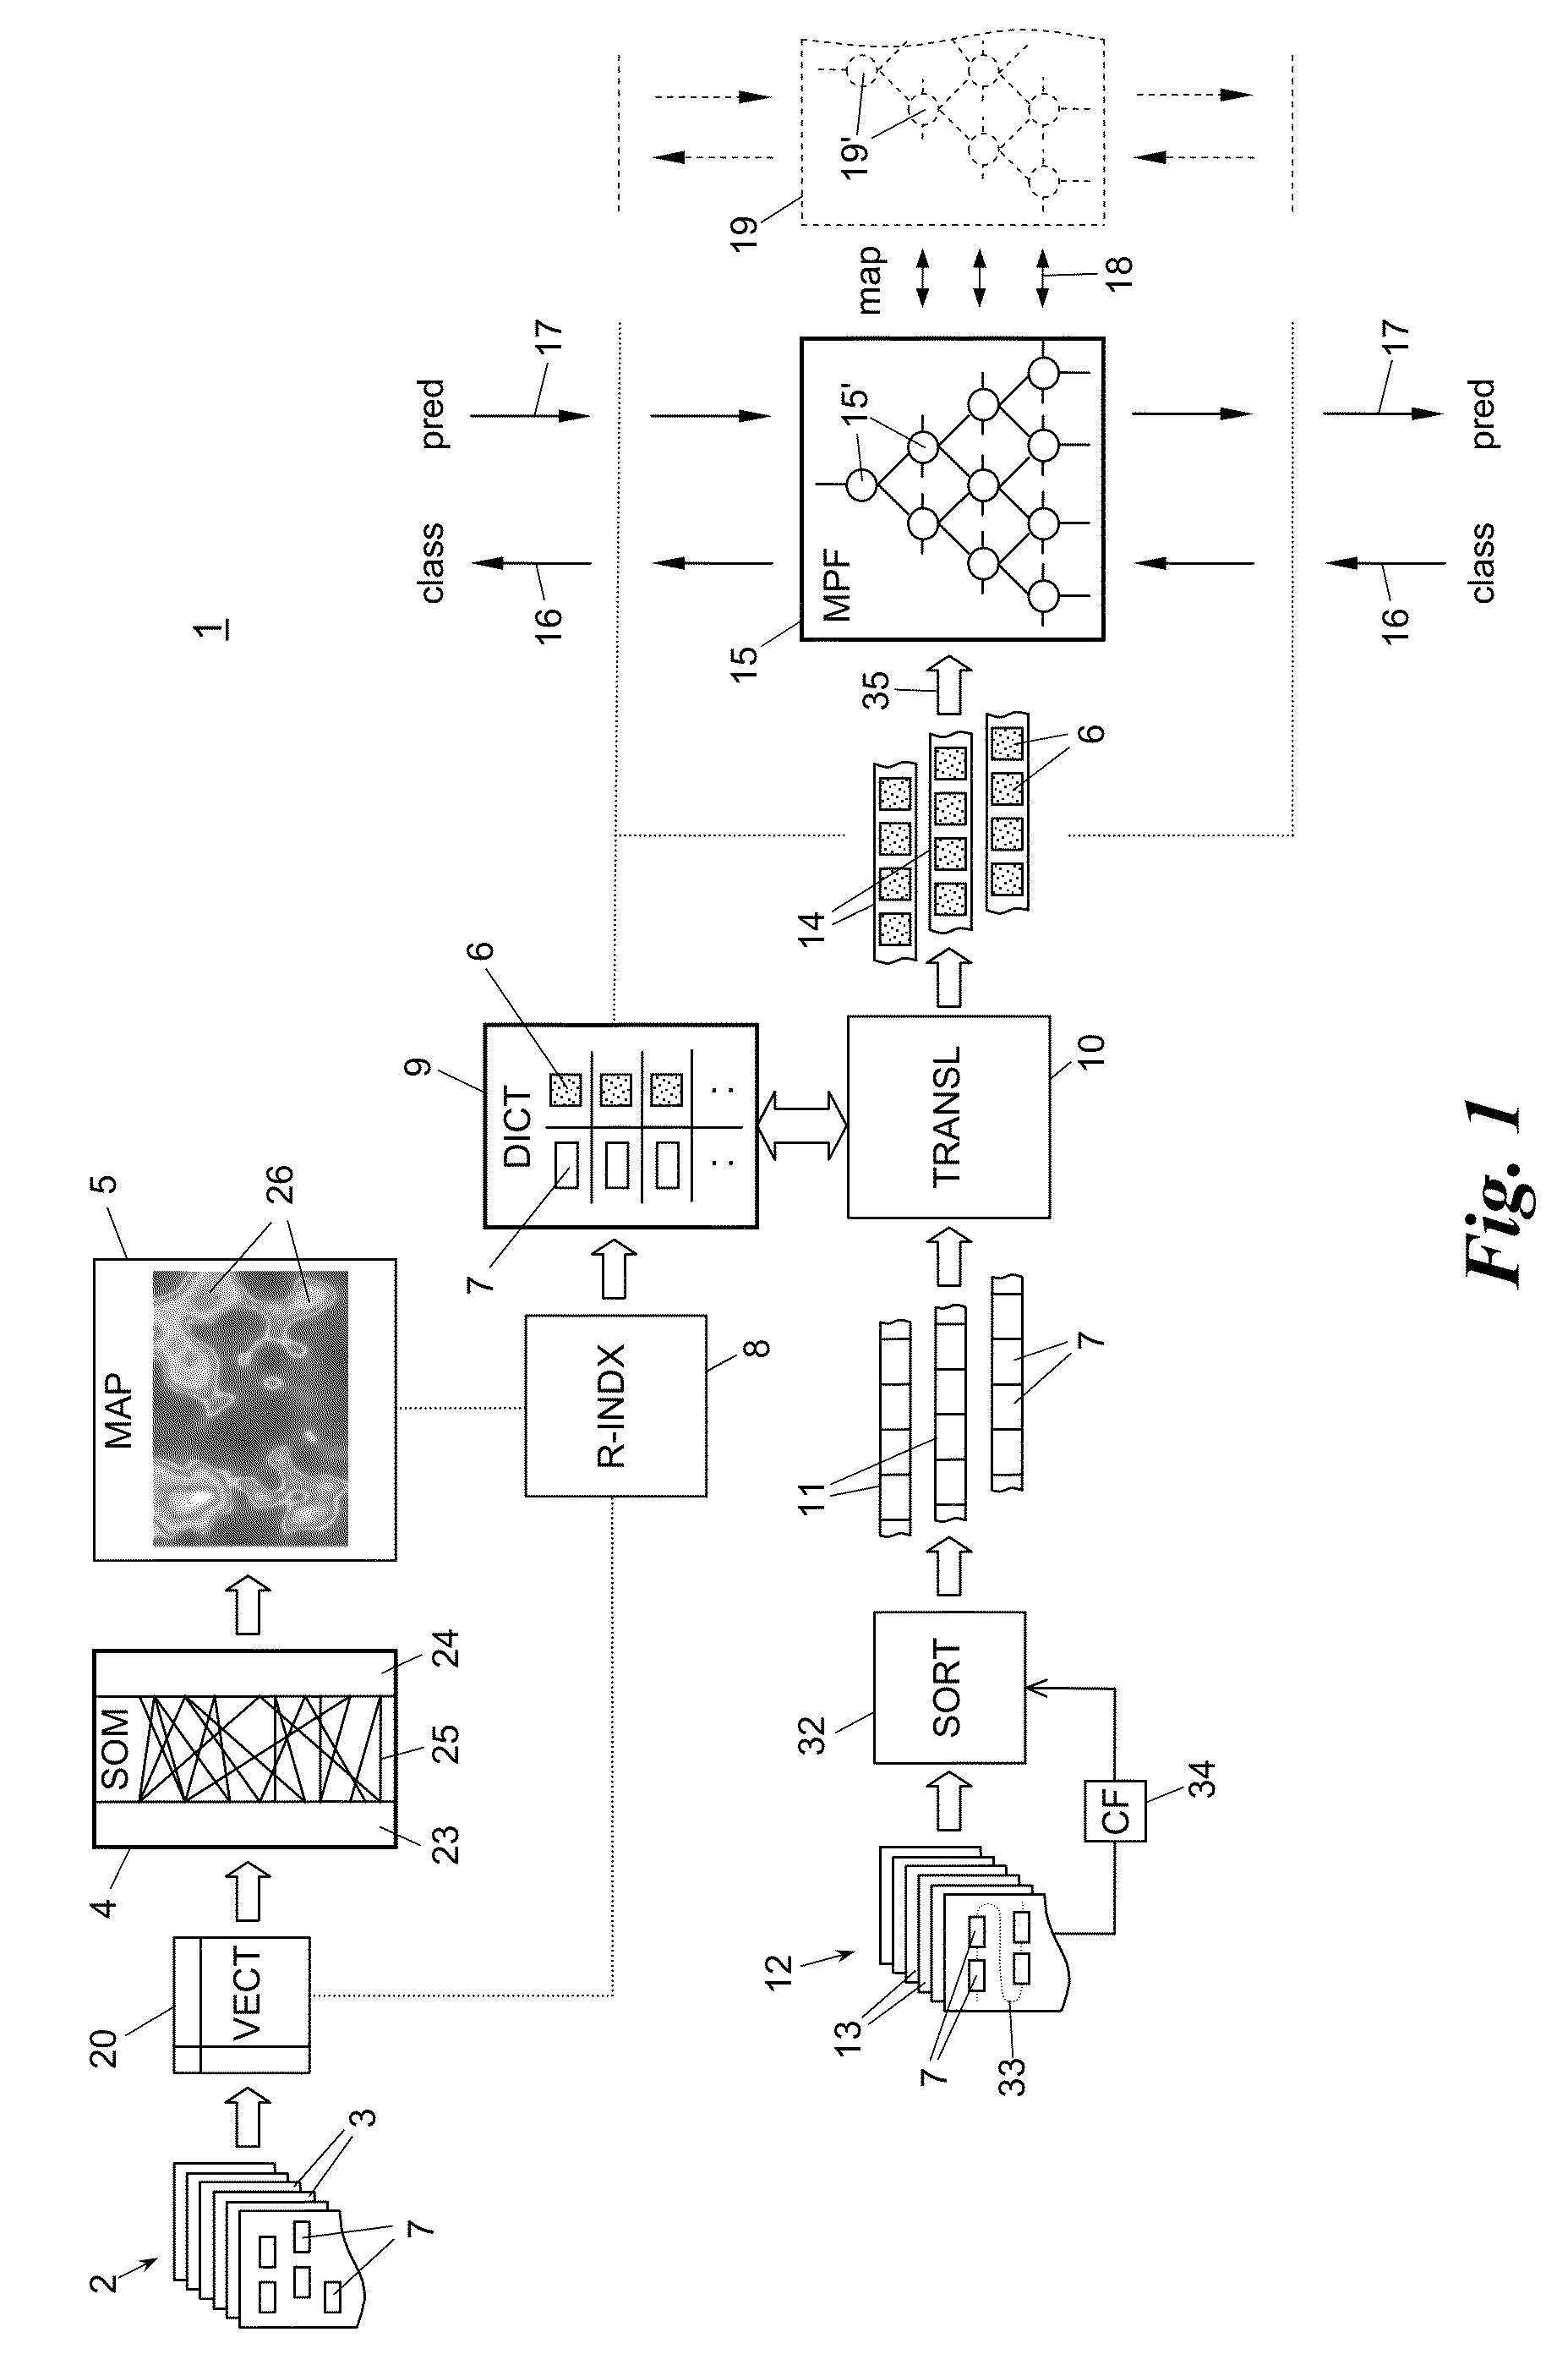 Methods, Apparatus and Products for Semantic Processing of Text